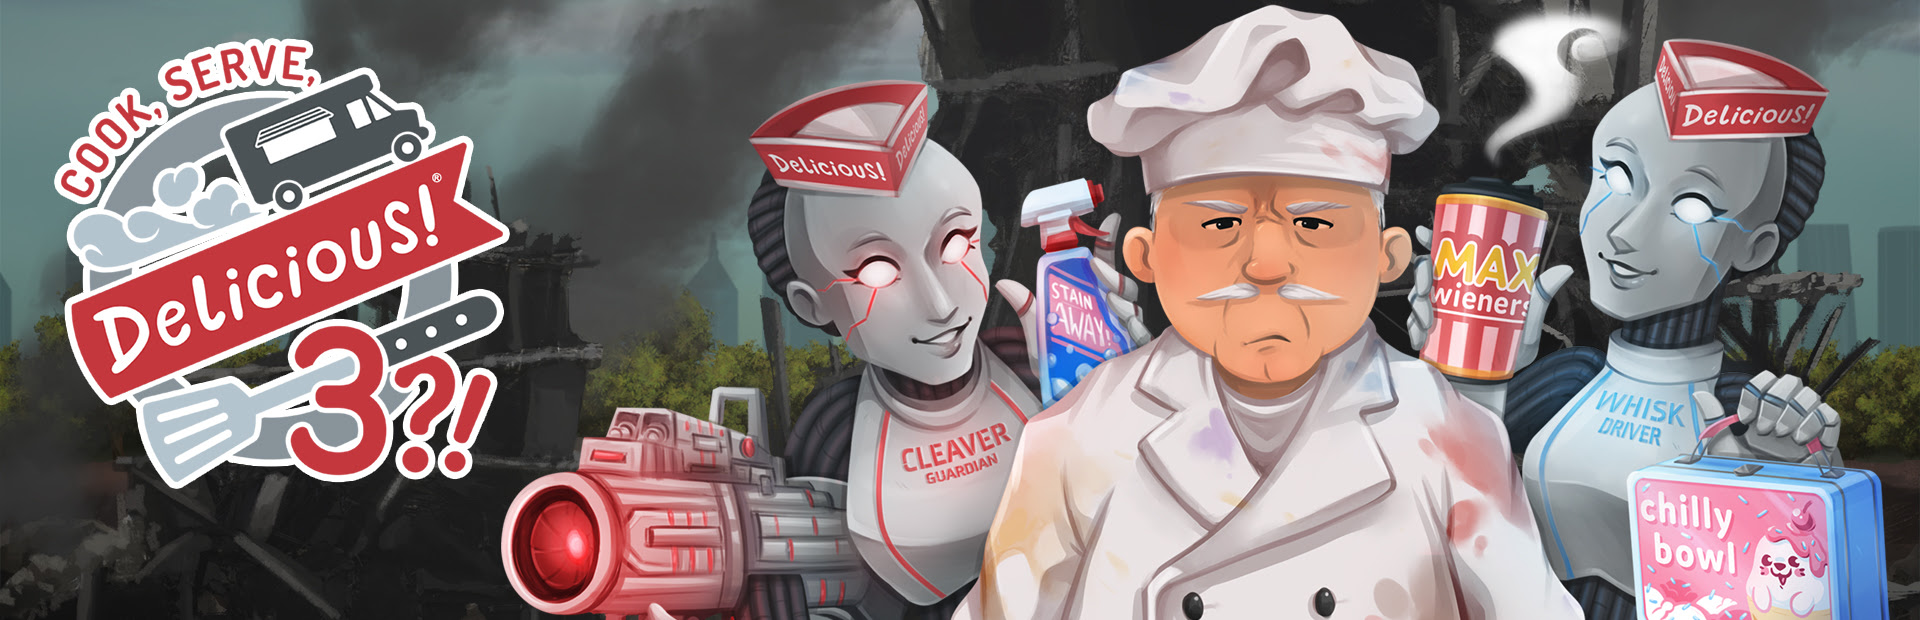 Cook, Serve, Delicious! 3?! Launches on Steam Early Access and GOG